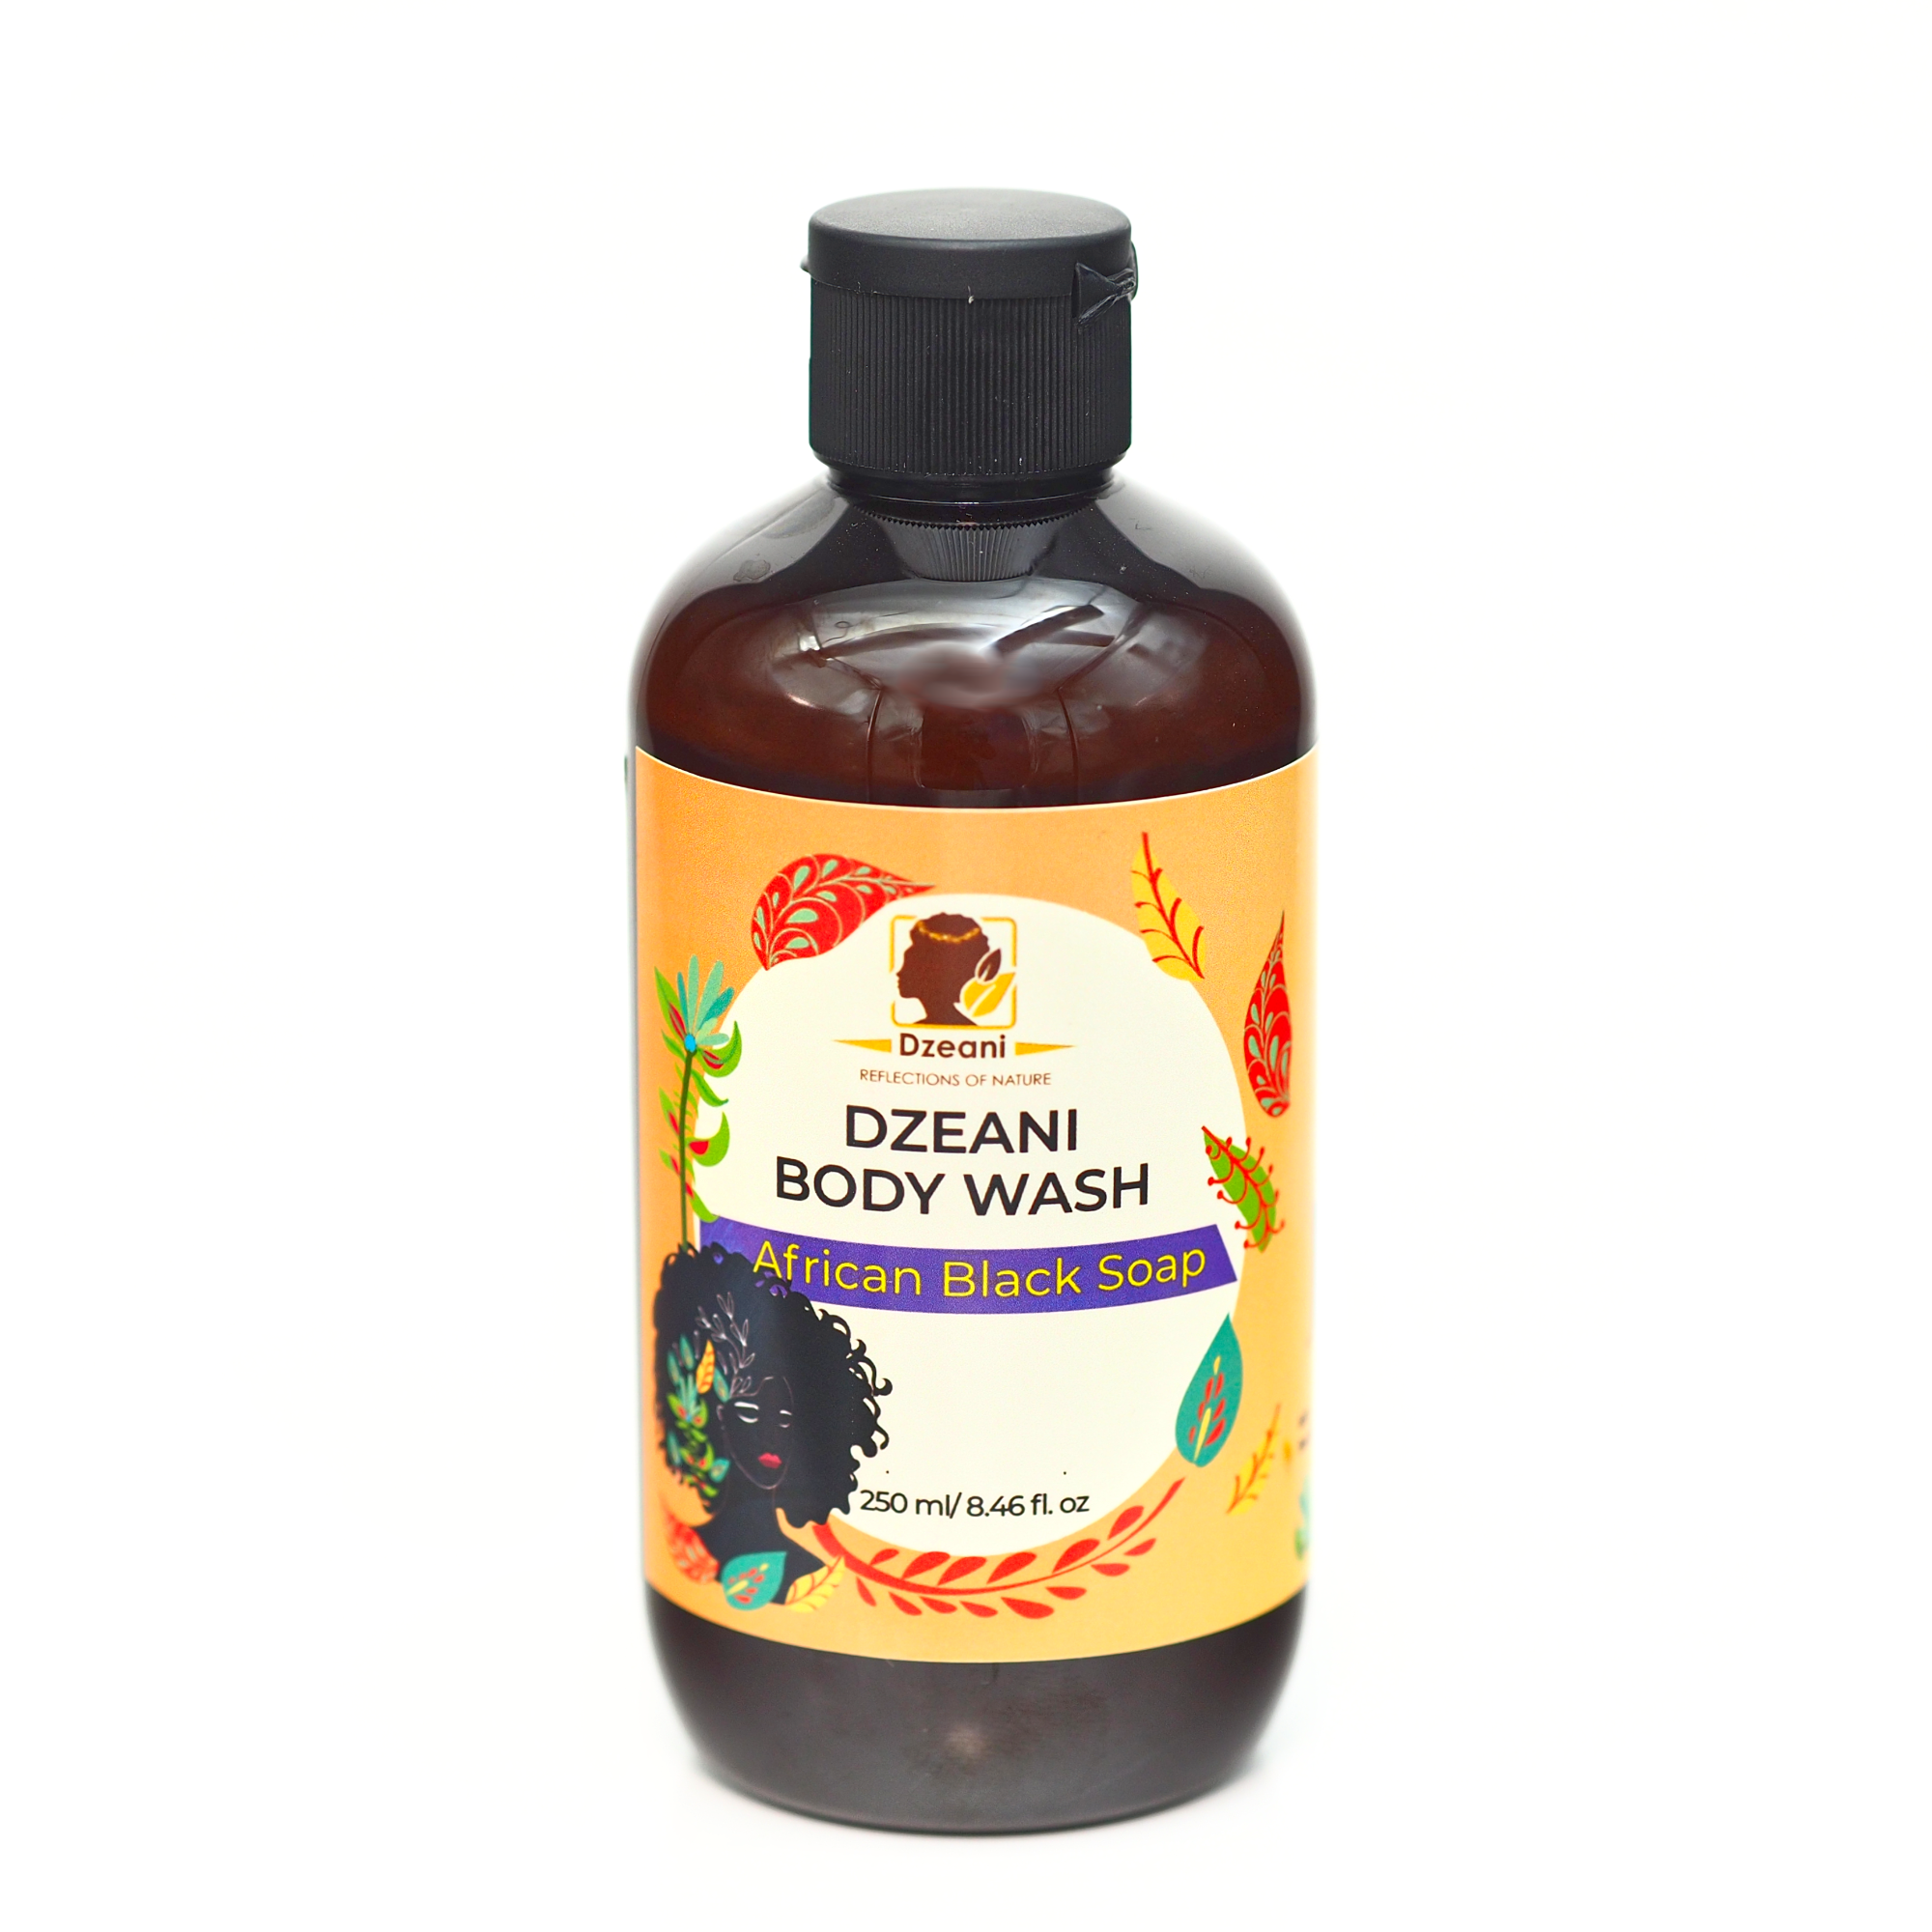 Dzeani's African Black Soap Body Wash is formulated to purify, hydrate, and soothe problem skin